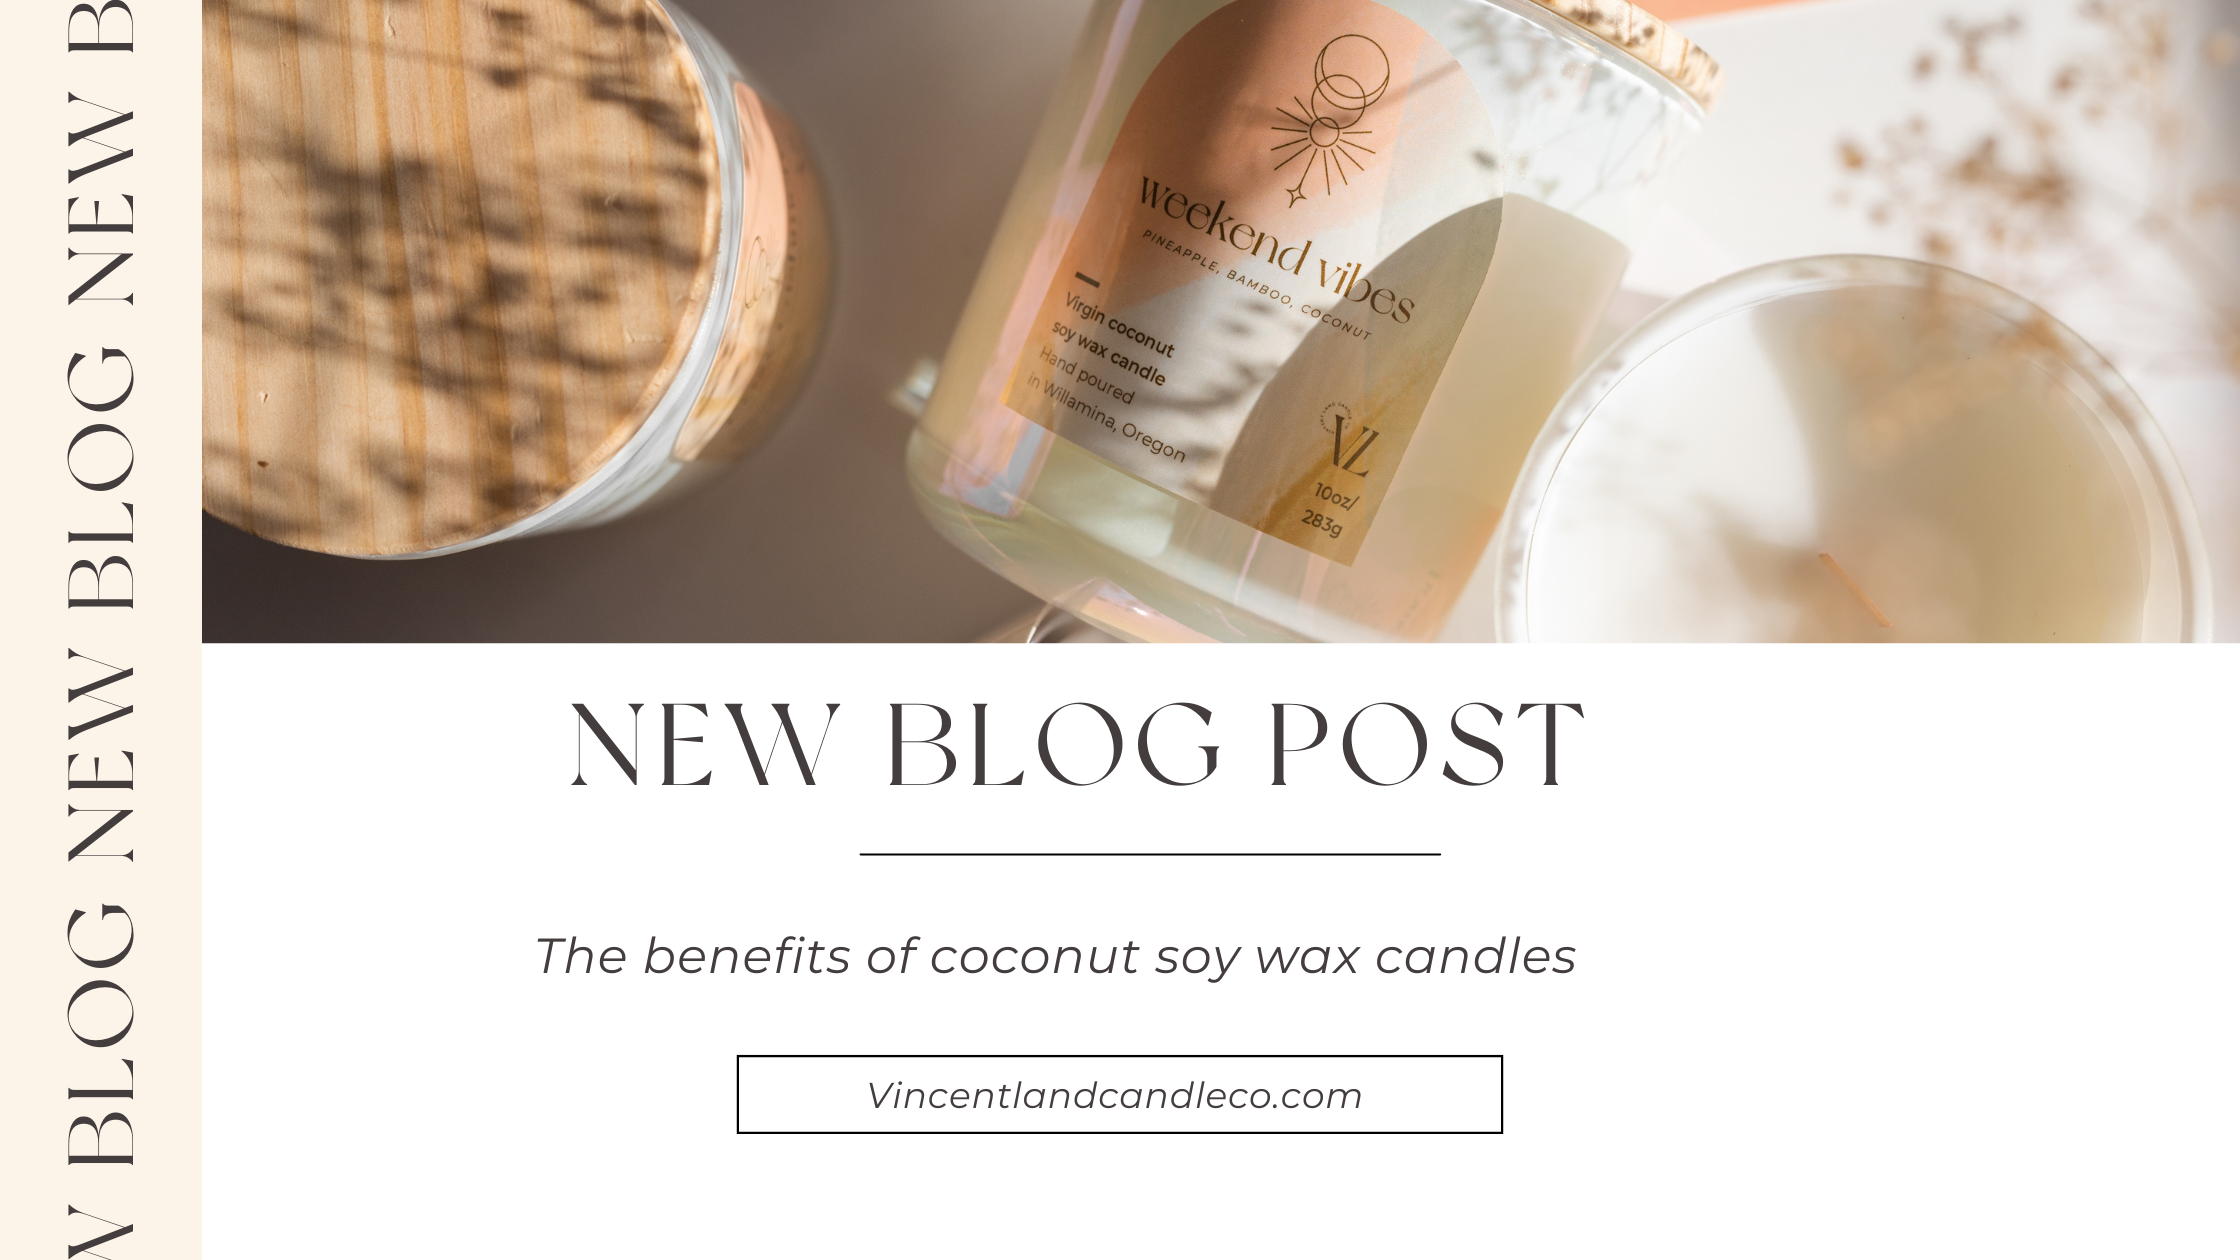 The benefits of coconut wax vs. paraffin wax candles – Borne Real